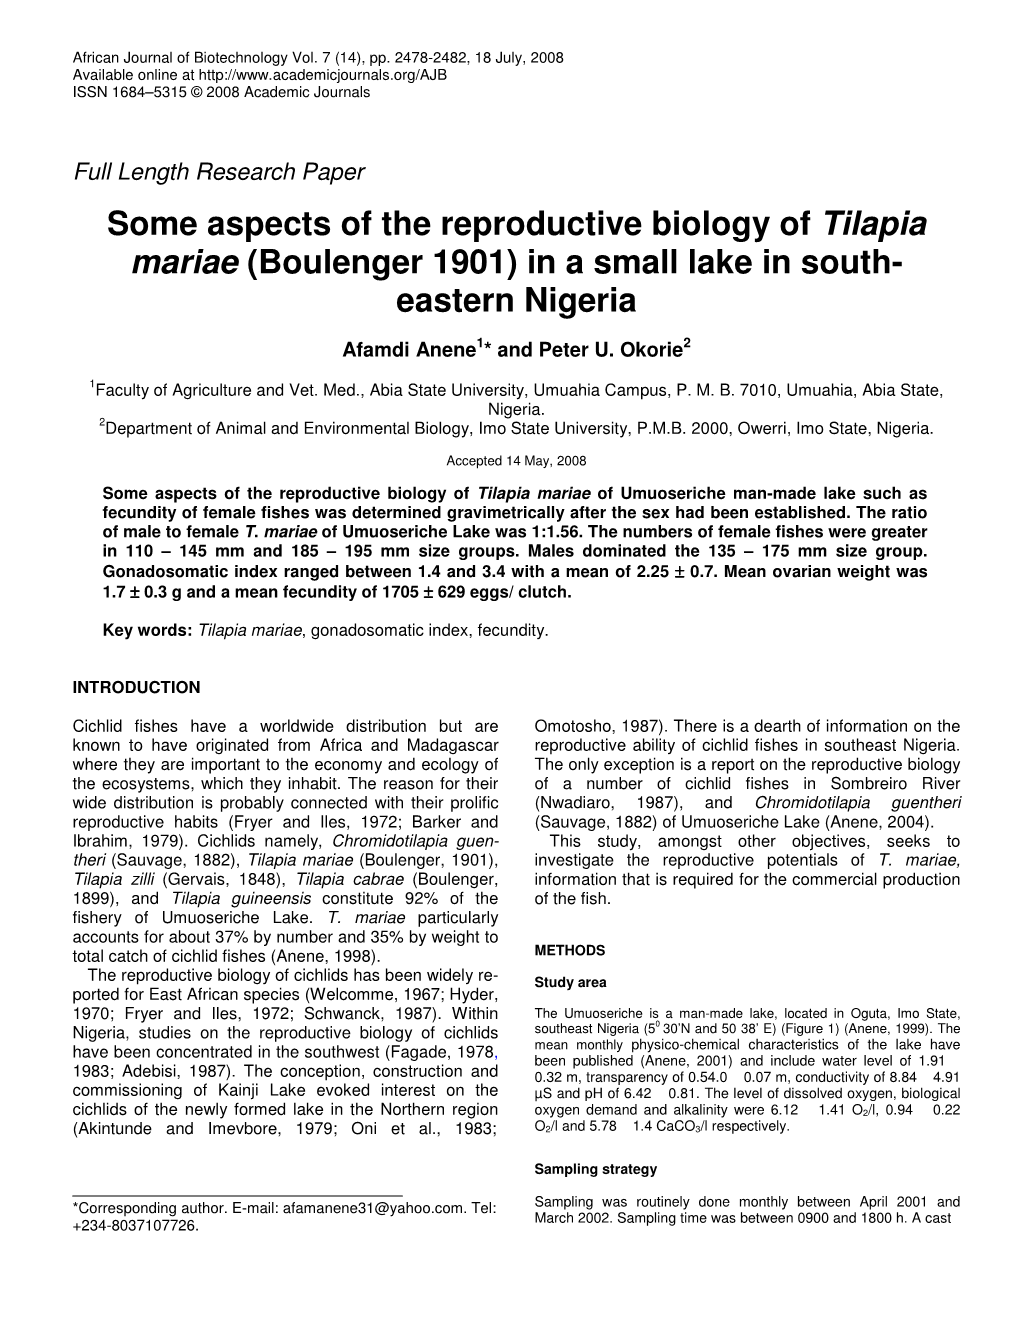 Some Aspects of the Reproductive Biology of Tilapia Mariae (Boulenger 1901) in a Small Lake in South- Eastern Nigeria